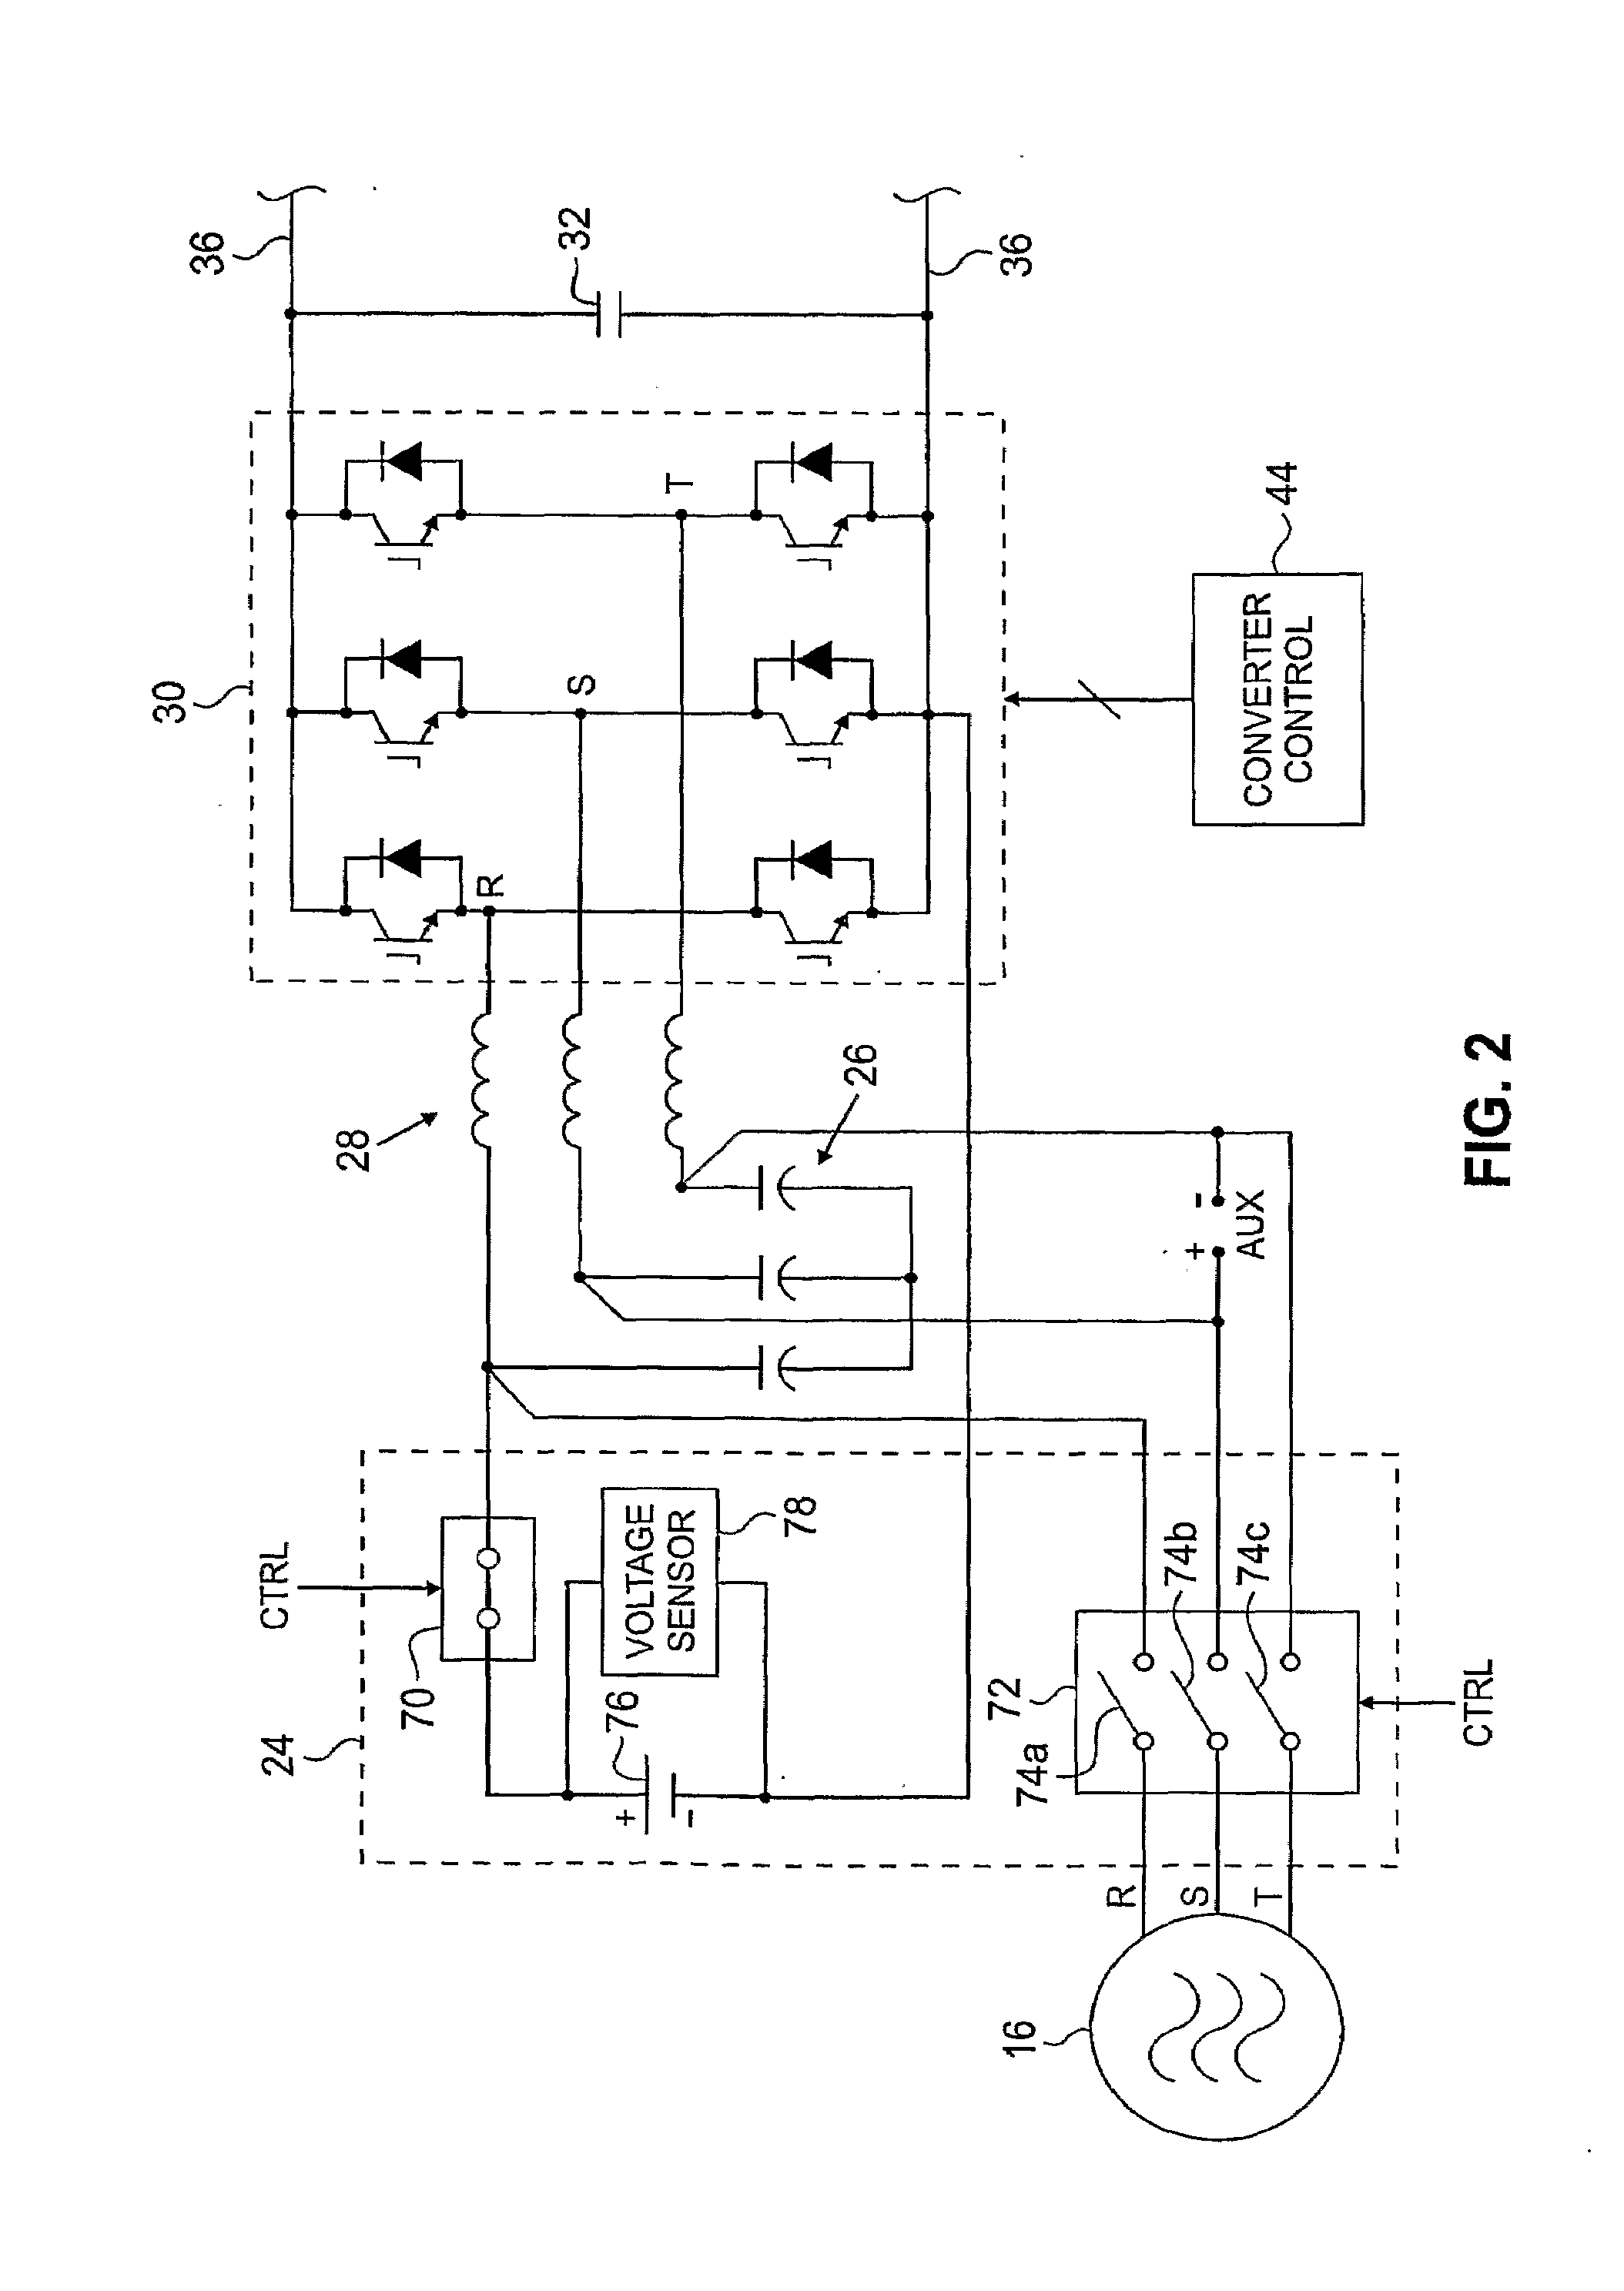 Automatic rescue operation for a regenerative drive system